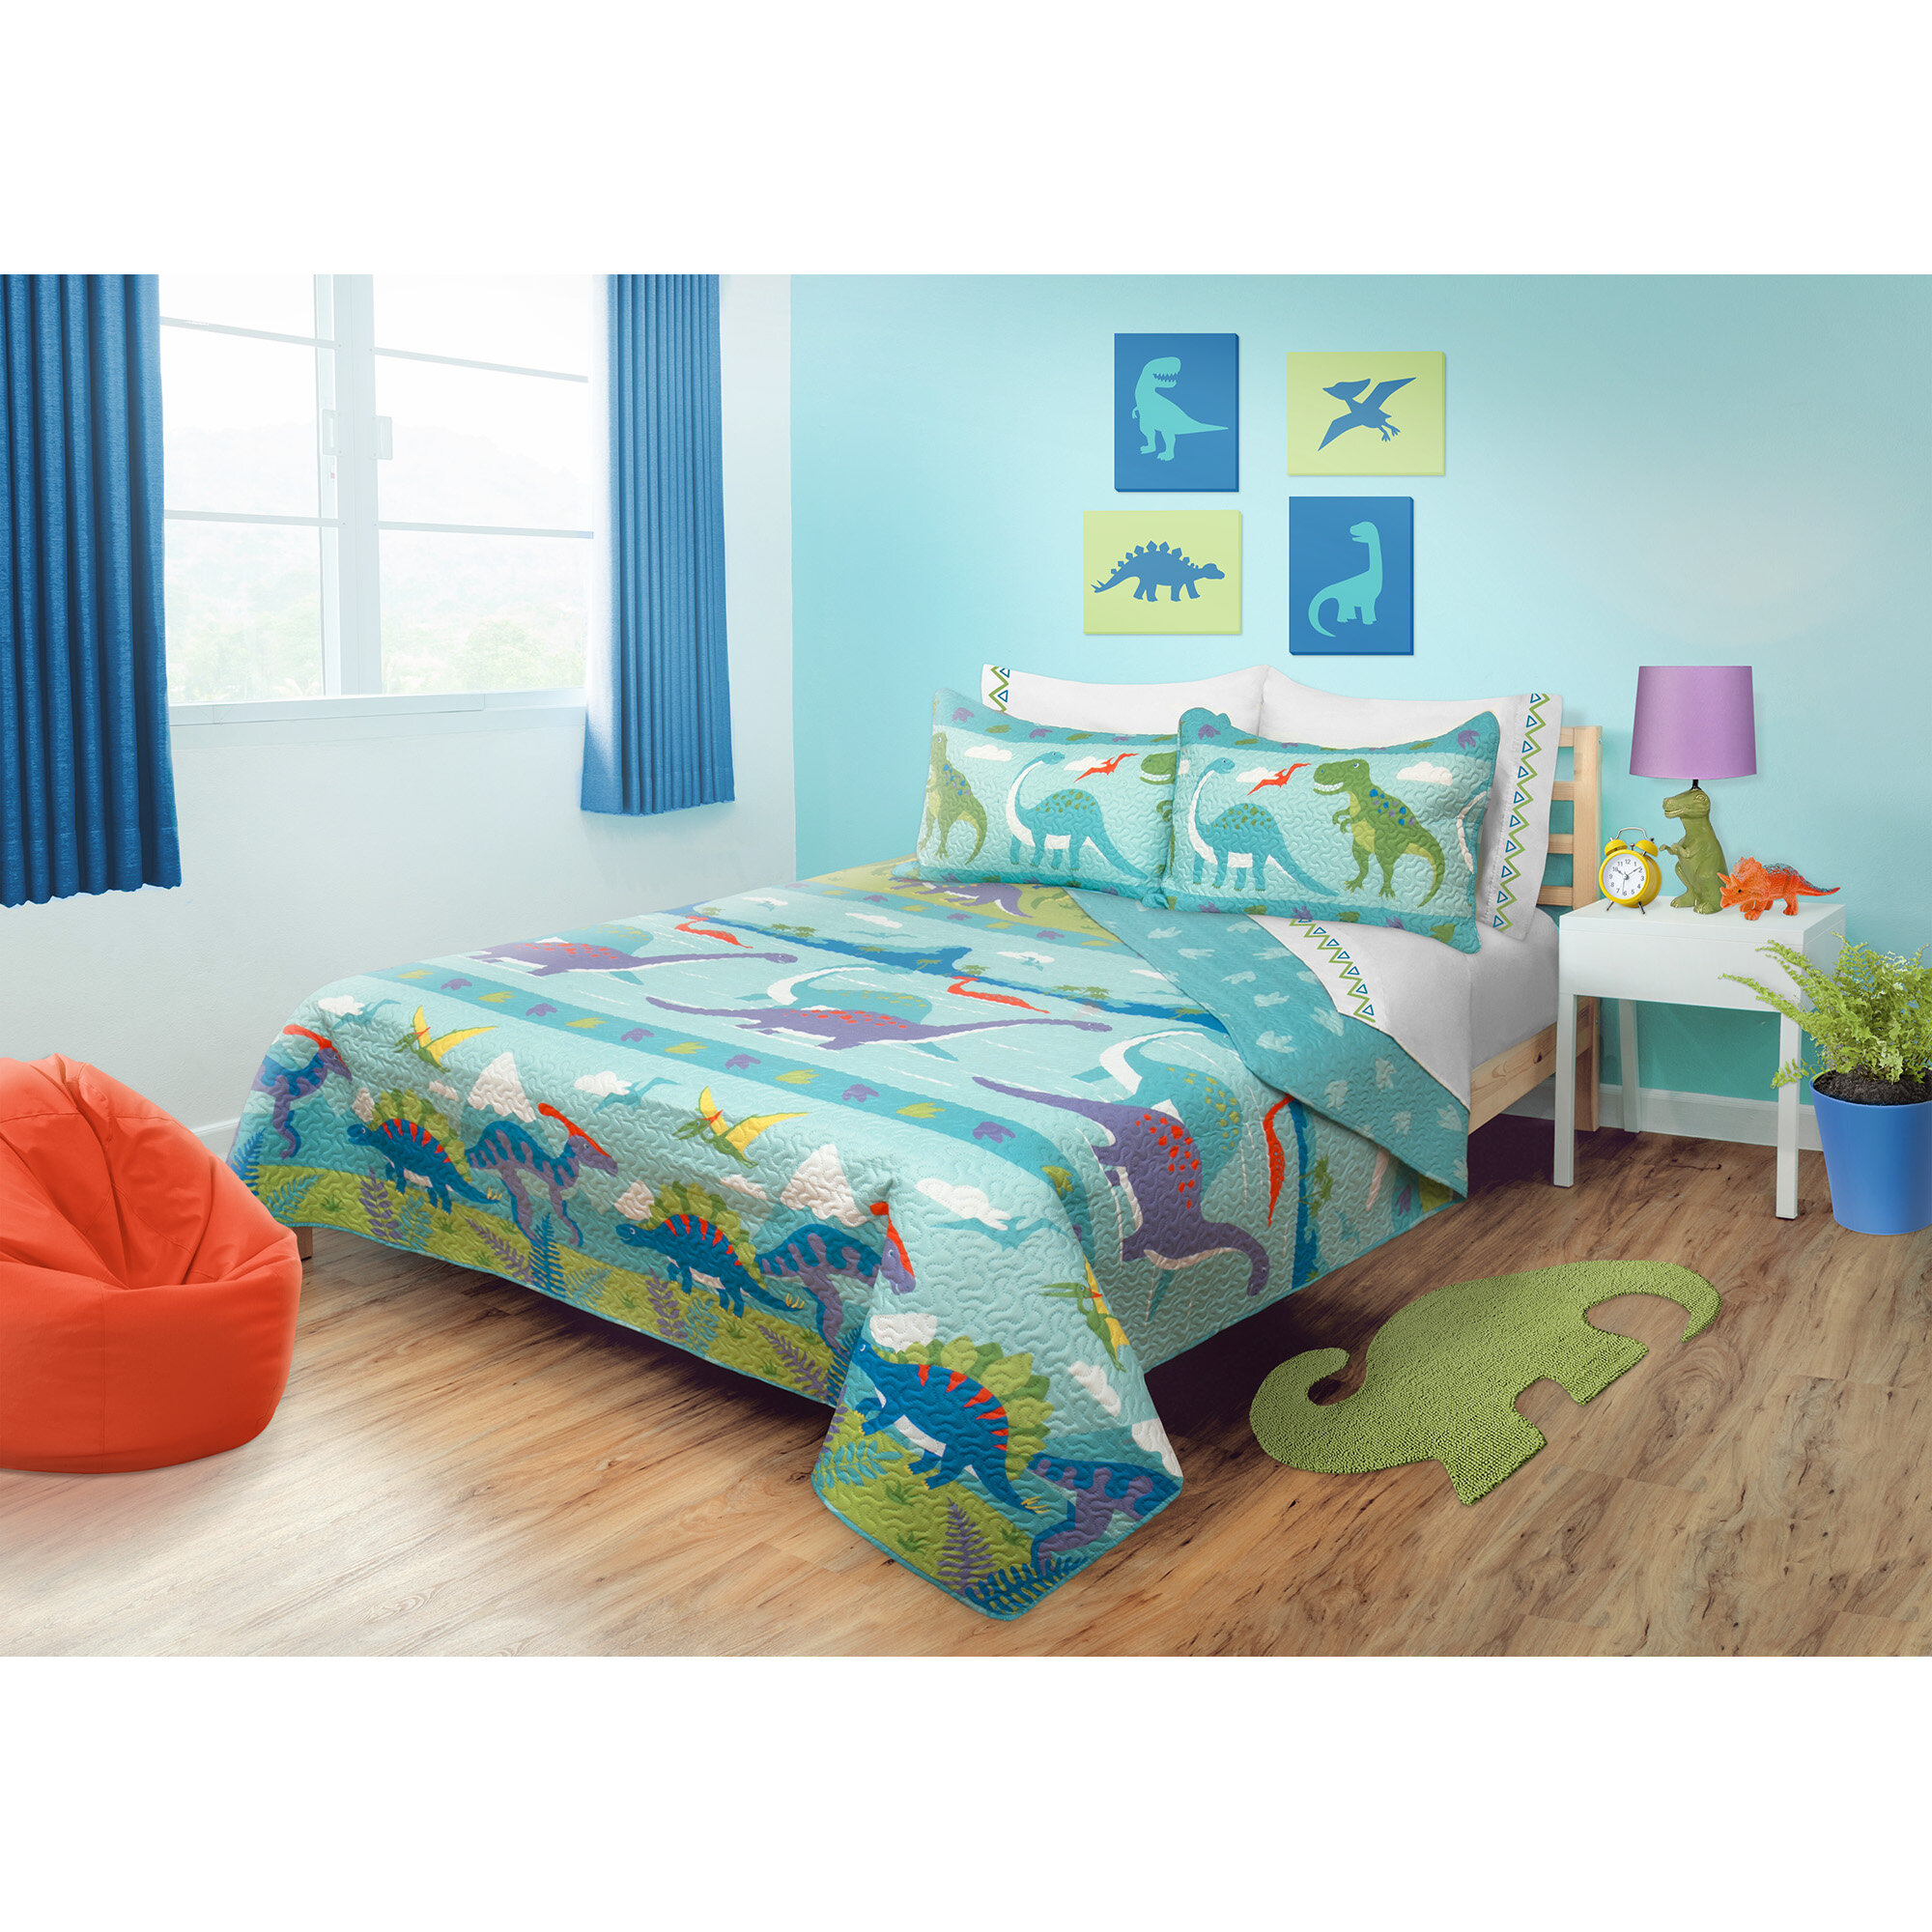 Supreme Kids Wrinkle Free Hypoallergenic Soft and Cozy Bed Sheets